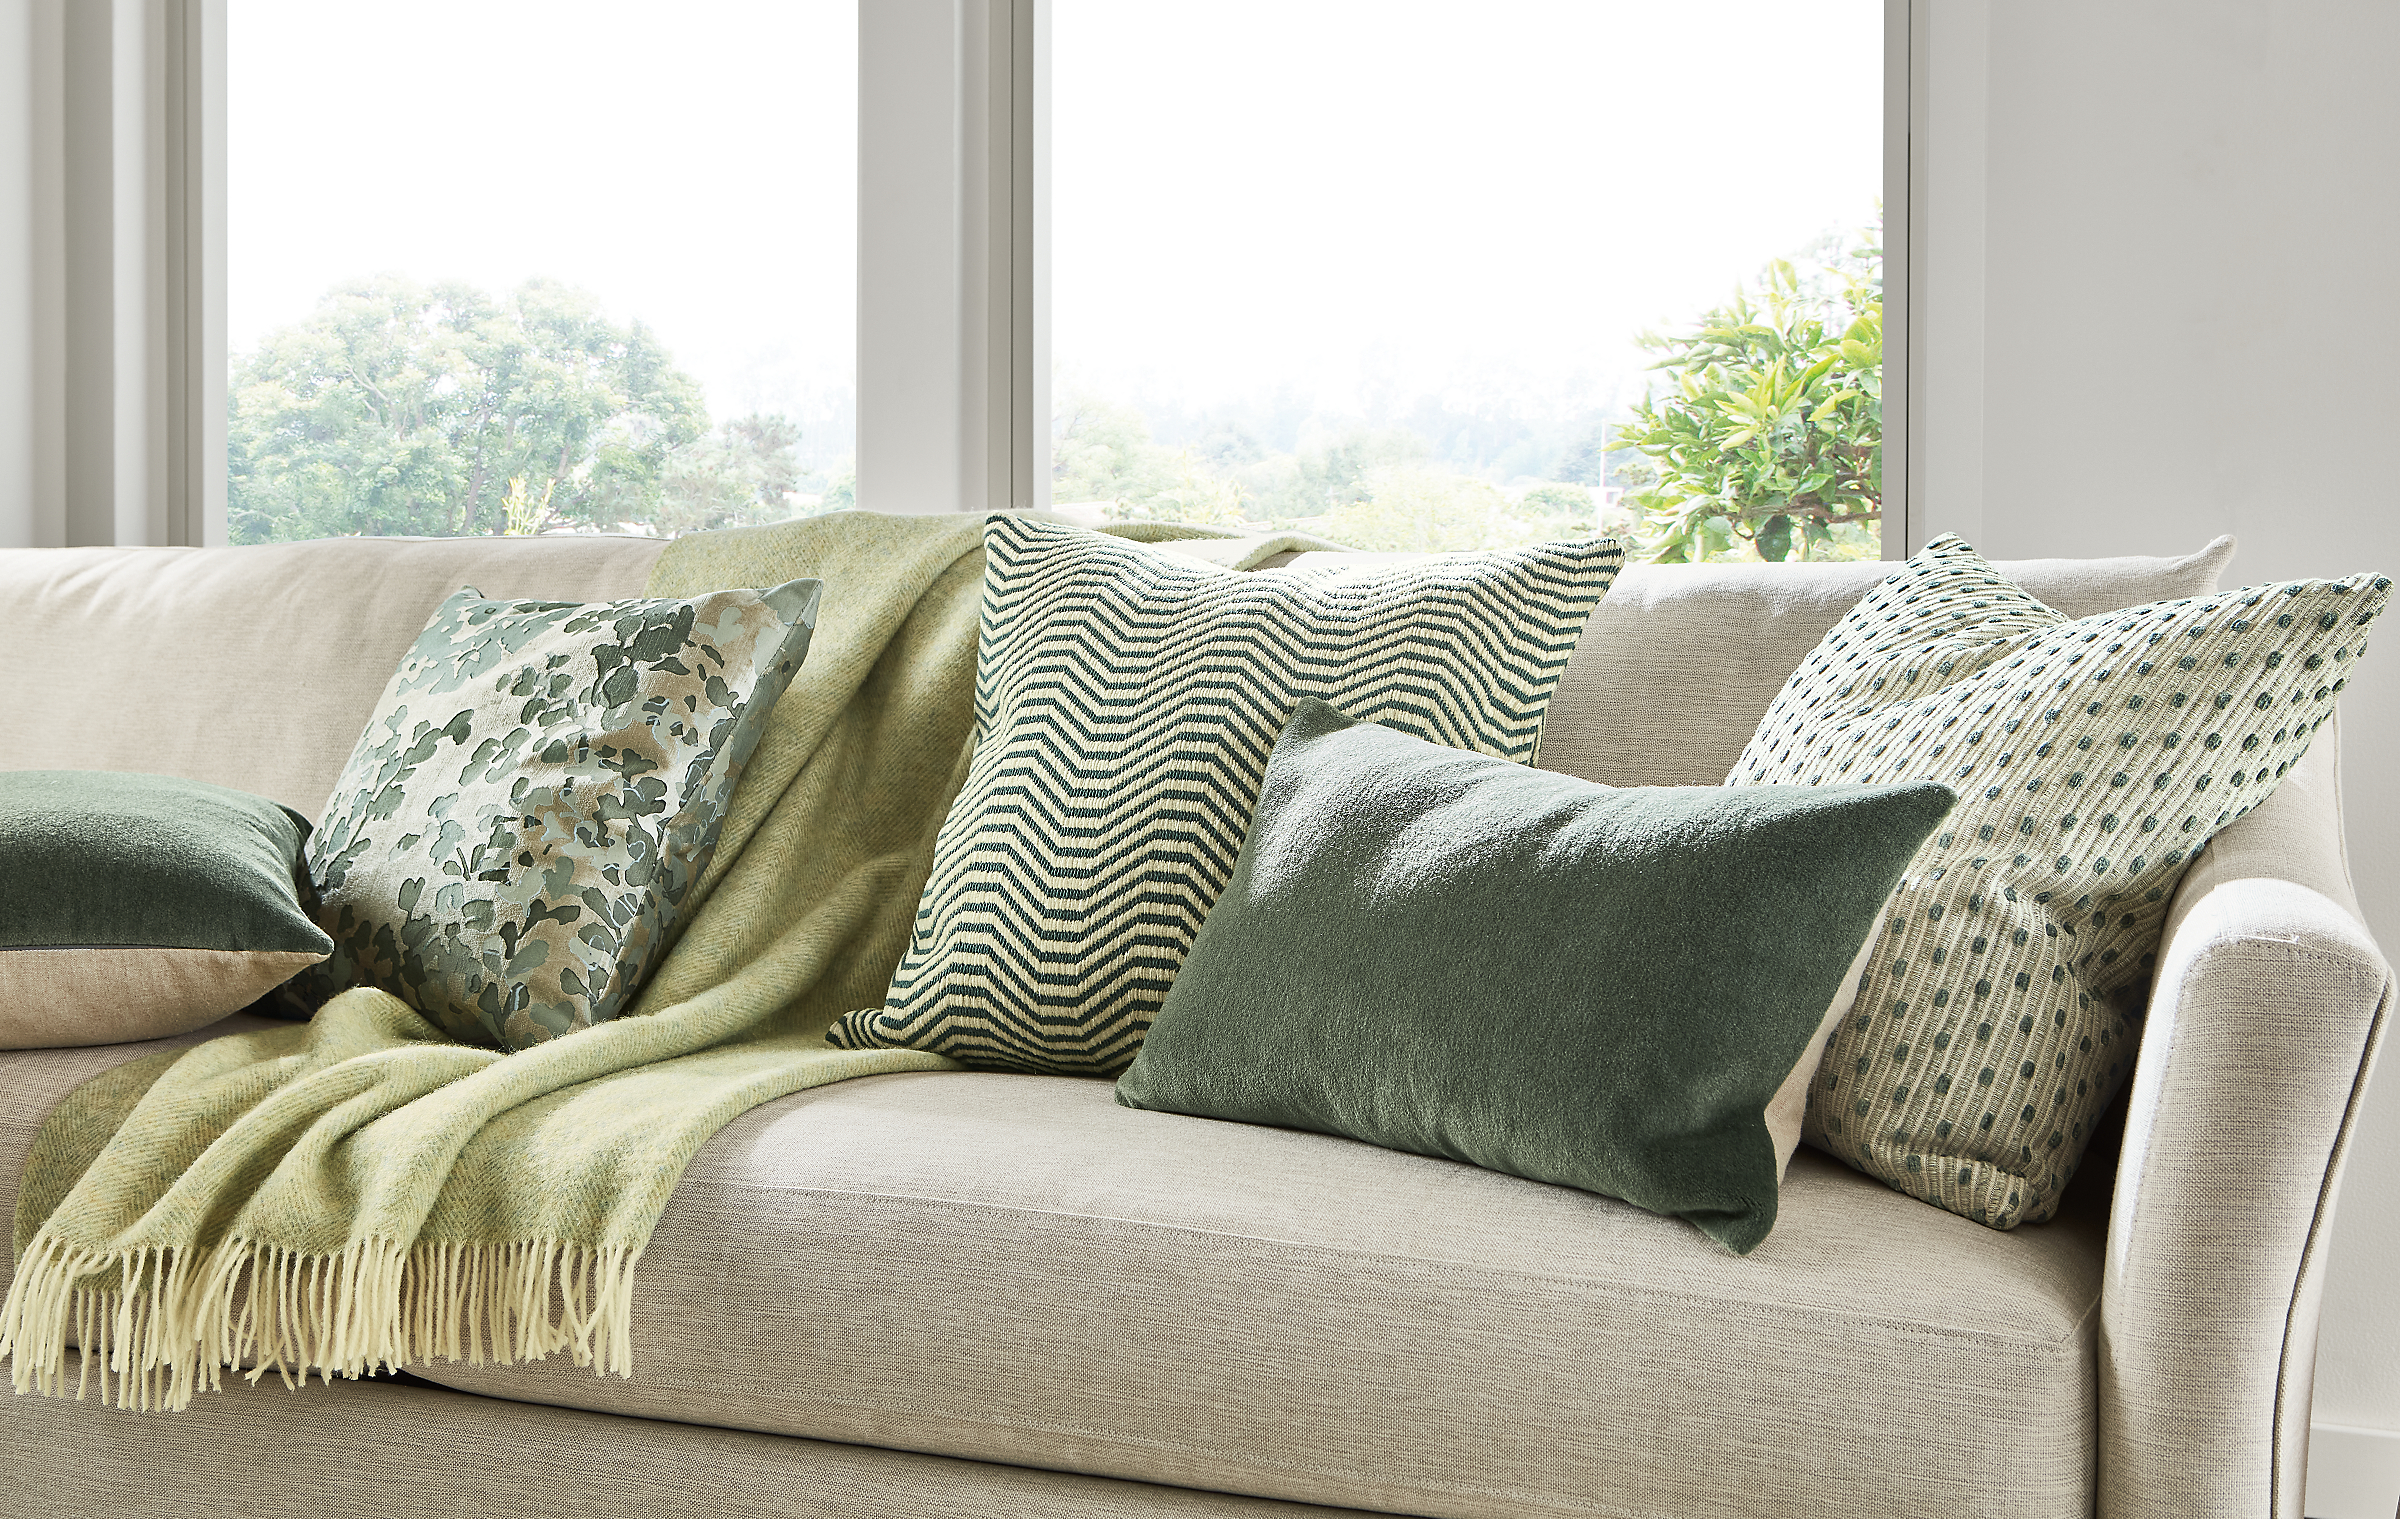 Maeve sofa in Yana natural with wool velvet pillows in olive, lines pillow in lagoon and claridge blanket in cloud.